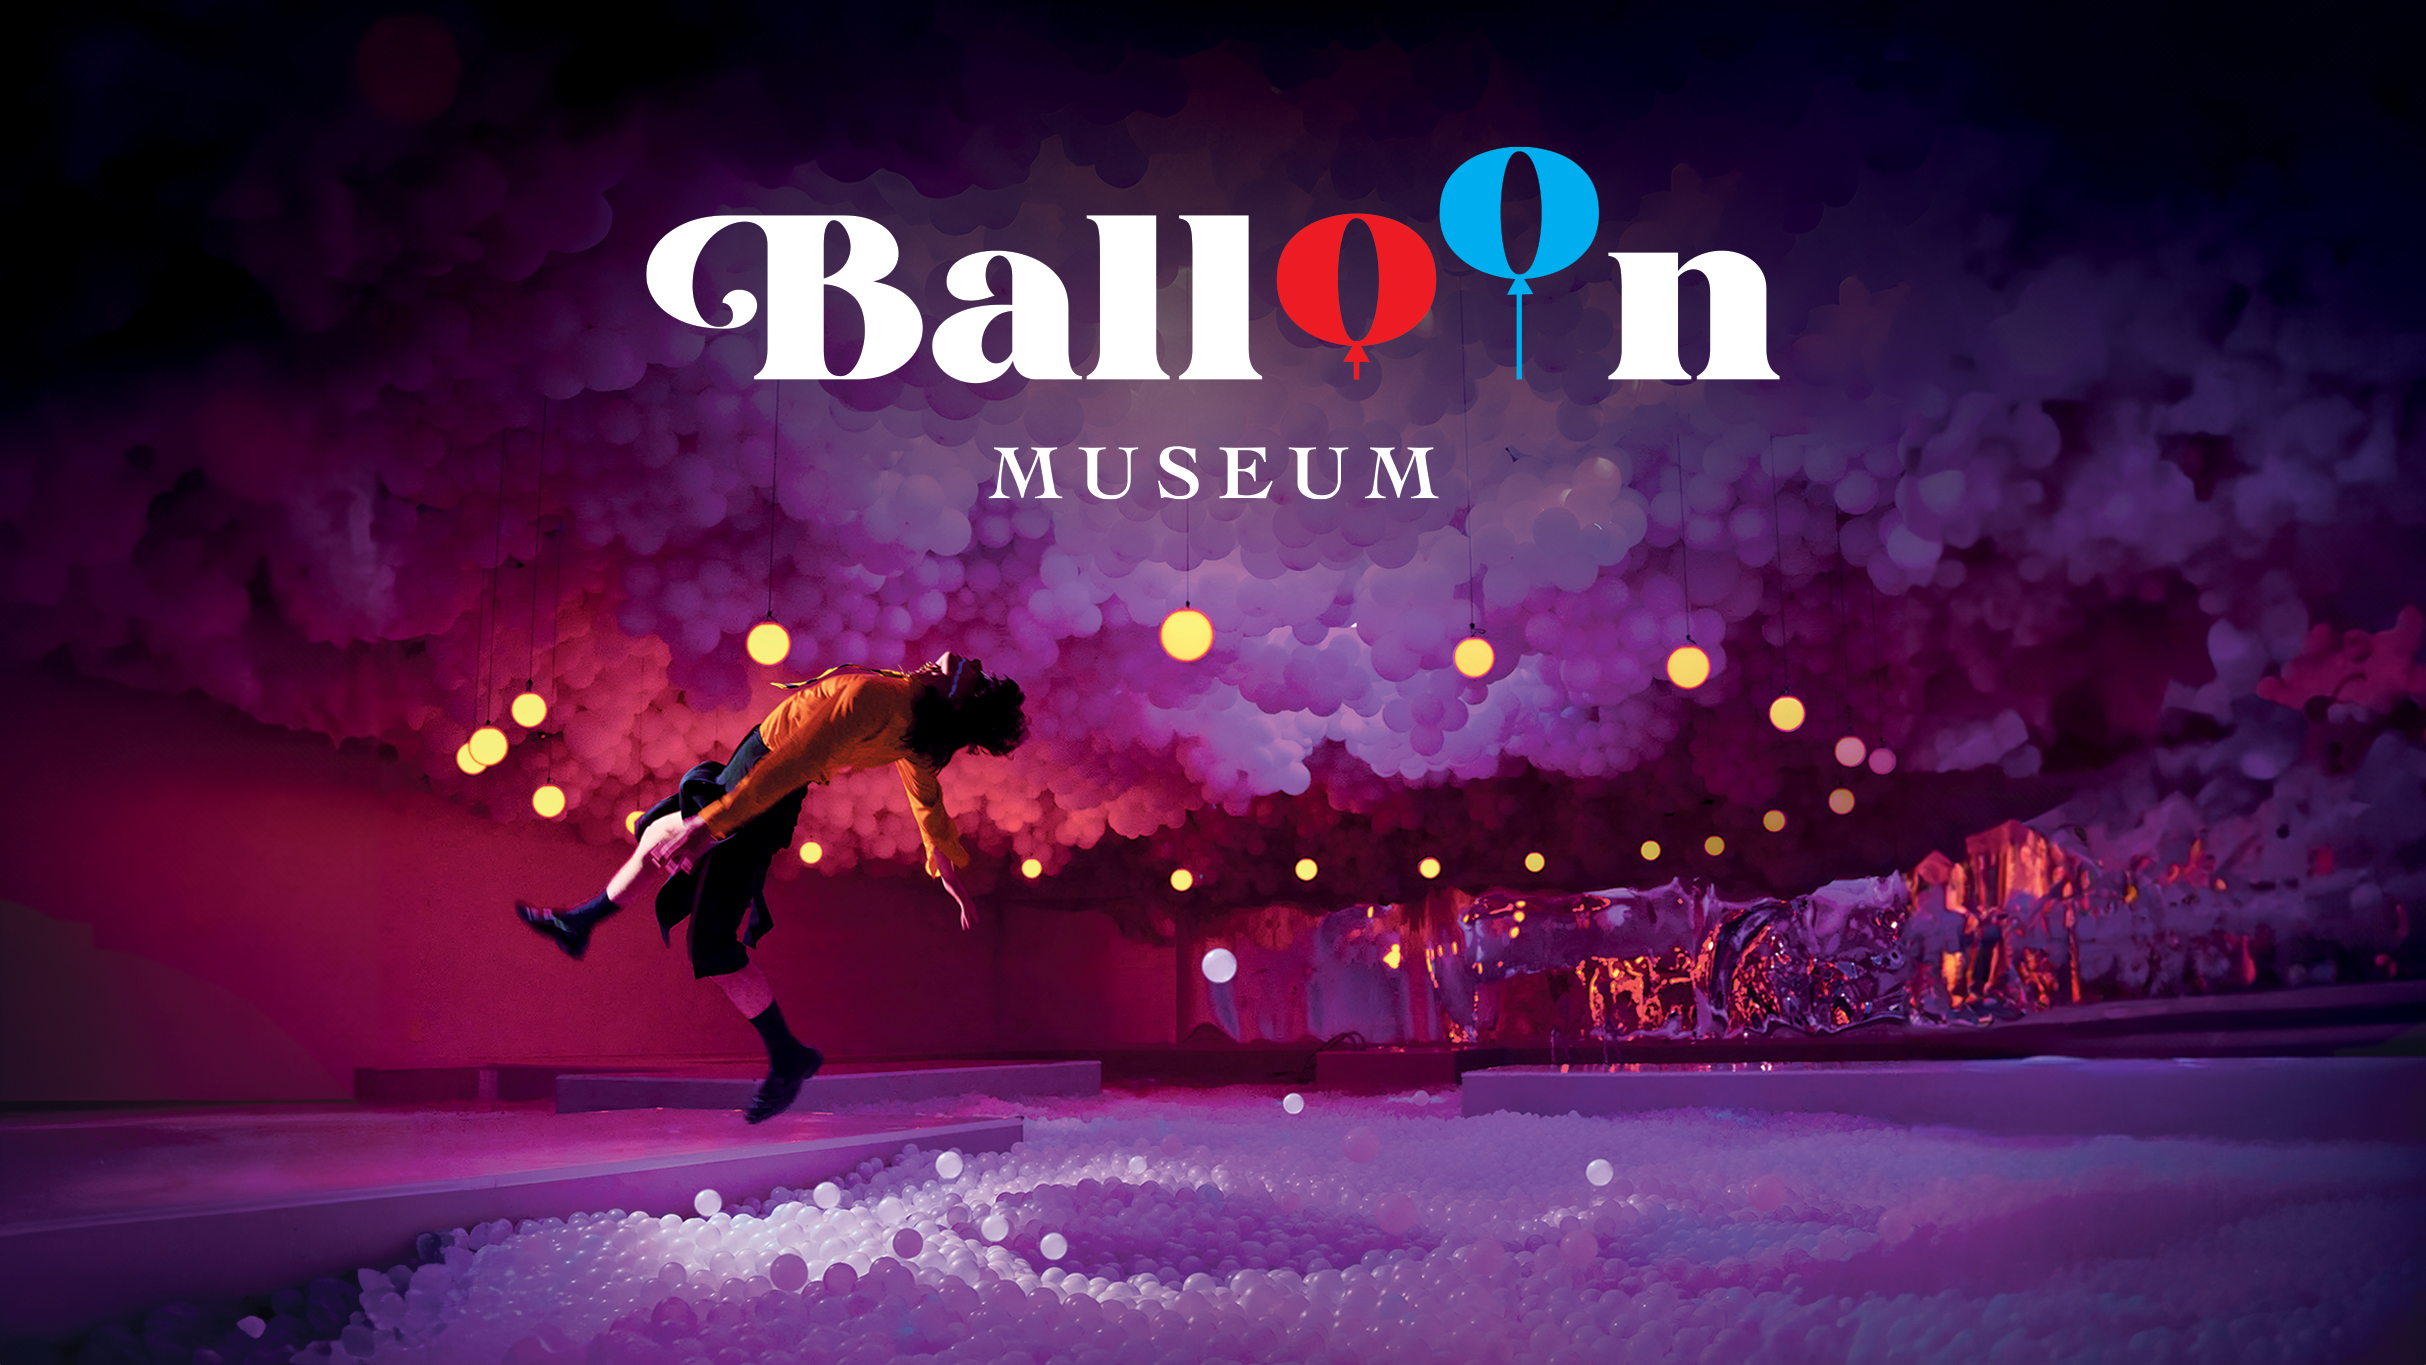 Balloon Museum - Let's fly